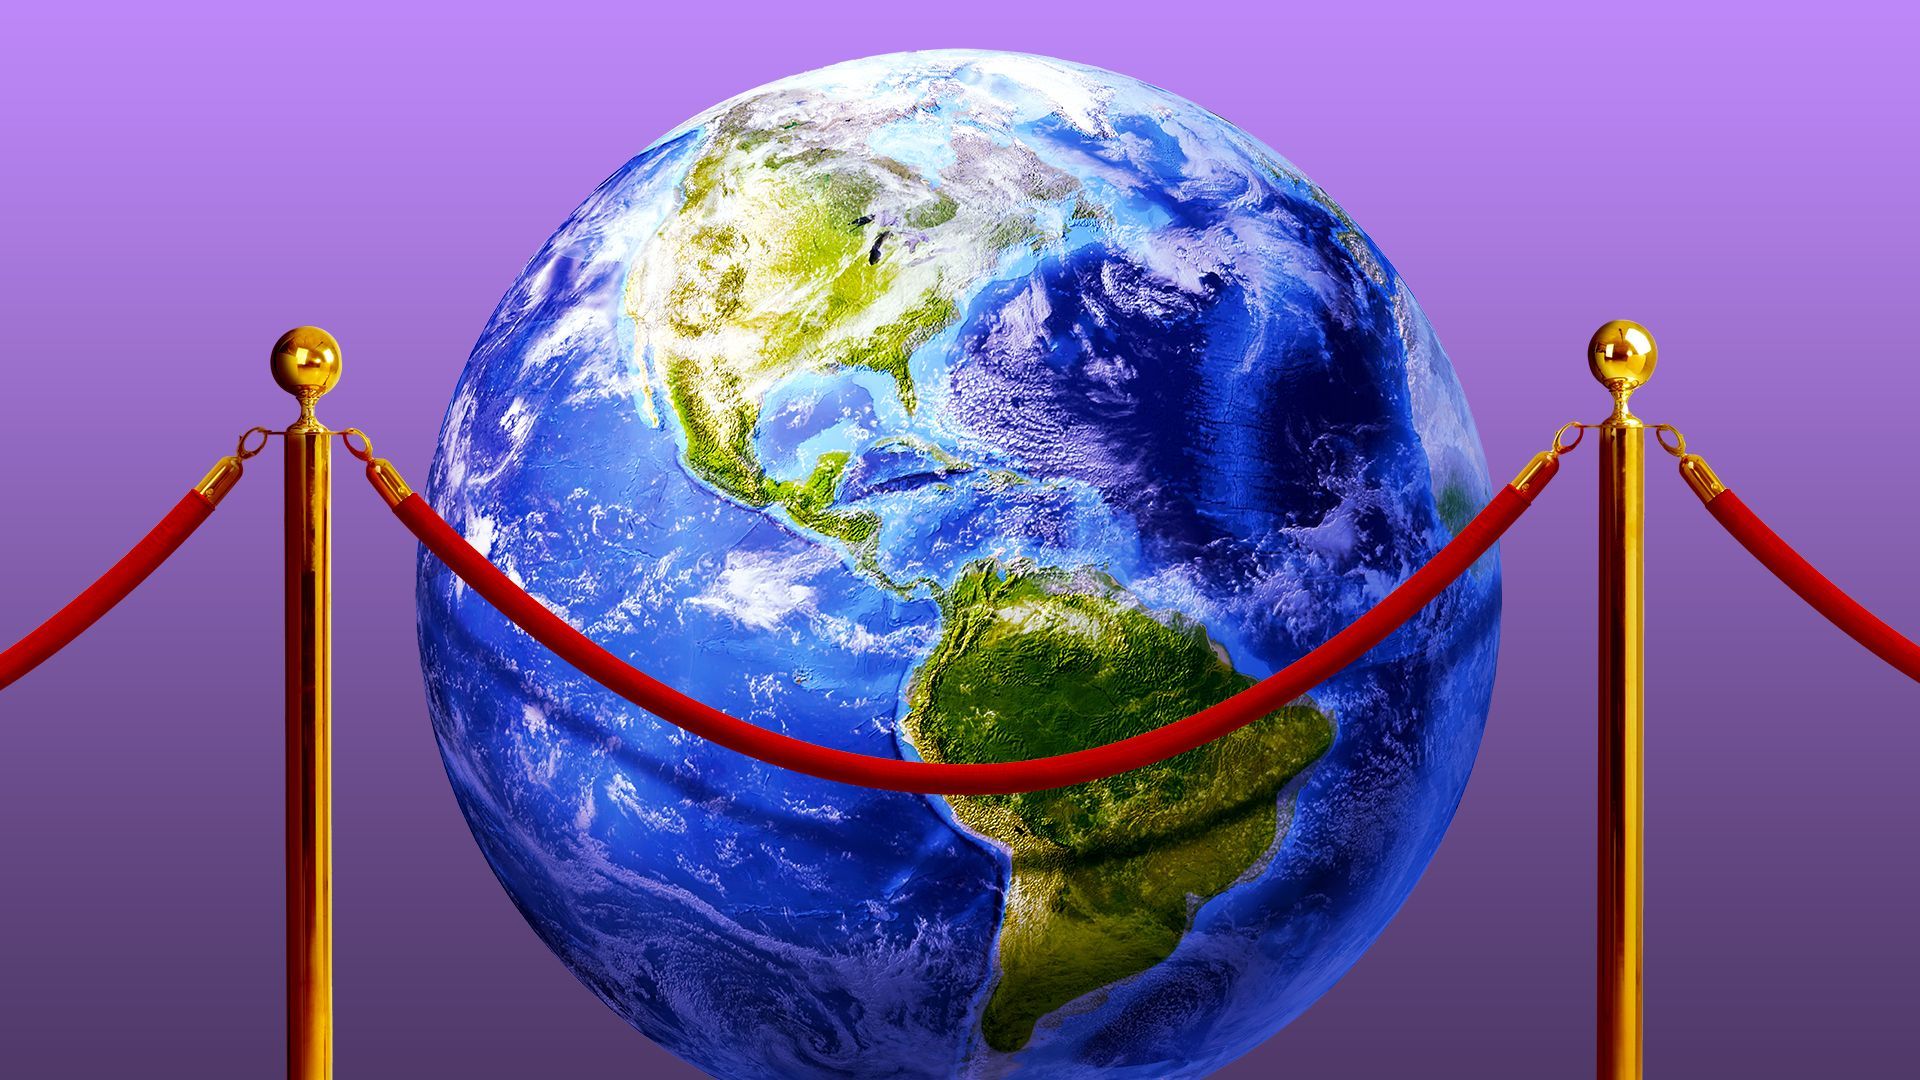 Illustration of the earth with the Americas visible behind a velvet rope